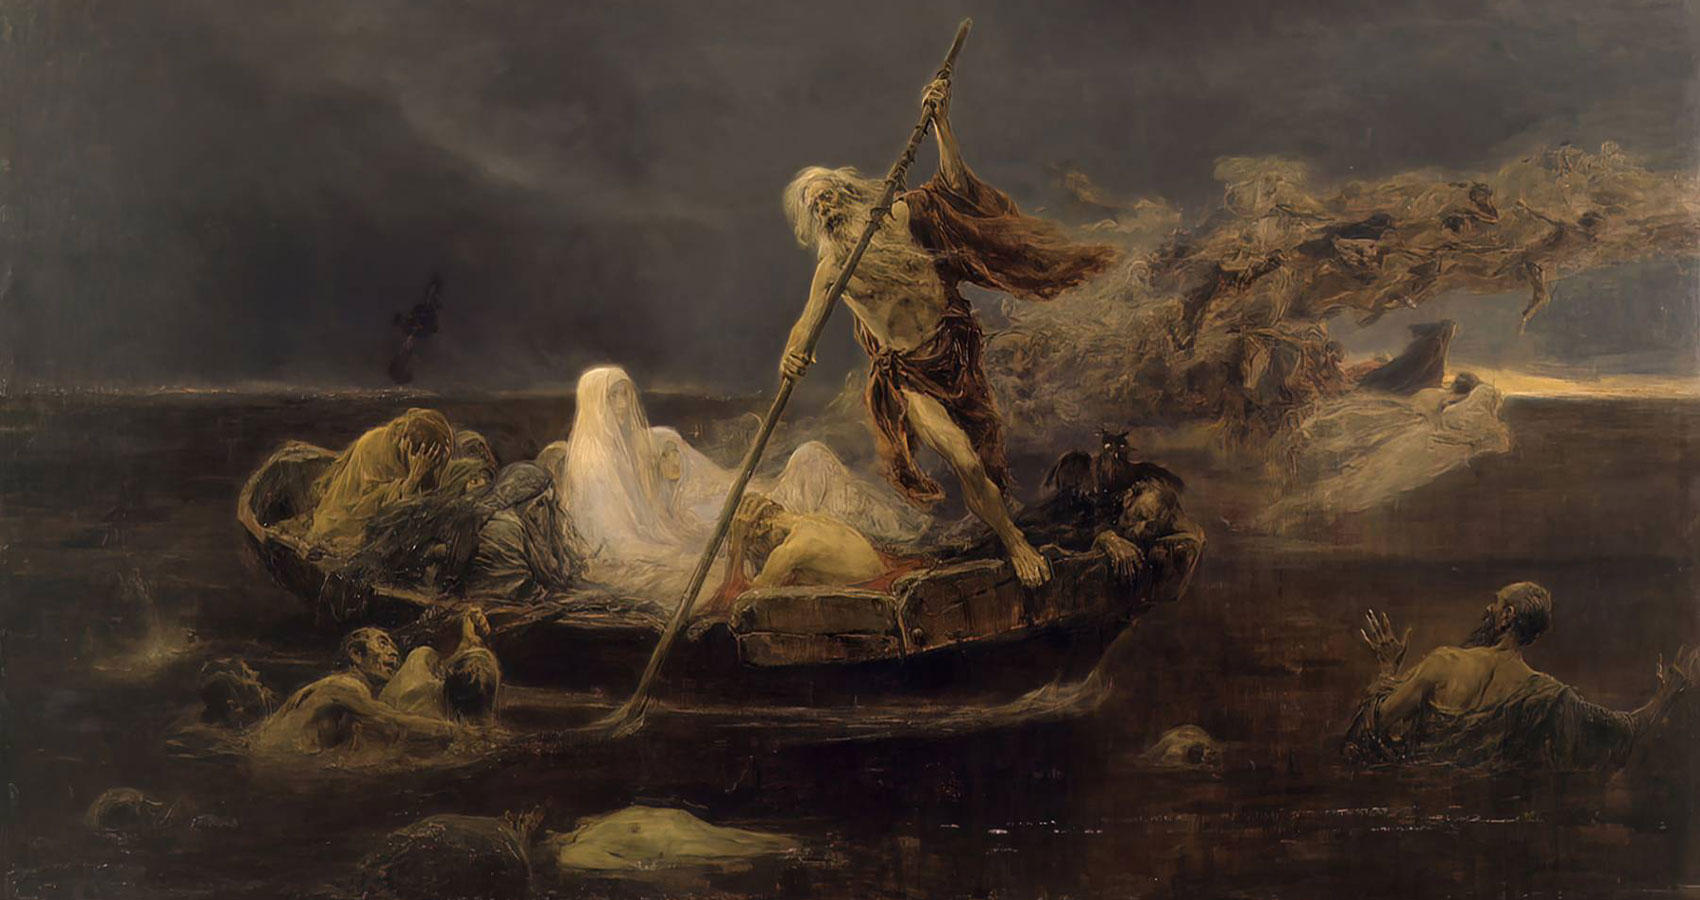 The Ferryman, poetry by David L Painter at Spillwords.com